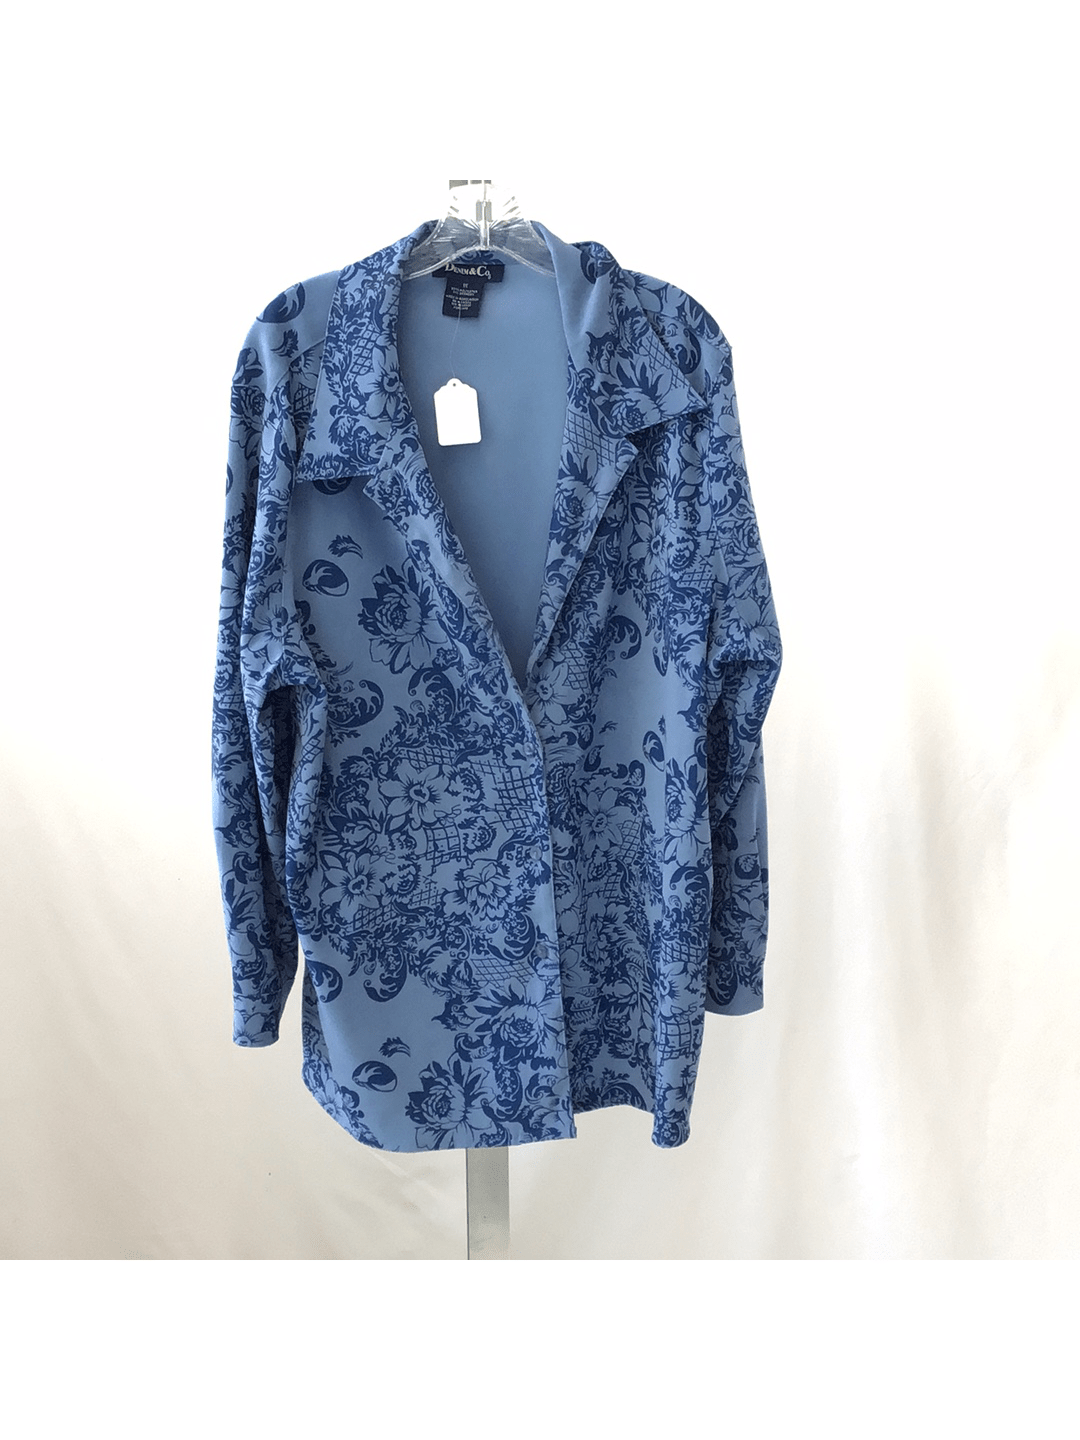 Denim & Co. Ladies Long Sleeved Navy Blue Blazer- Size 1X - The Kennedy Collective Thrift - 